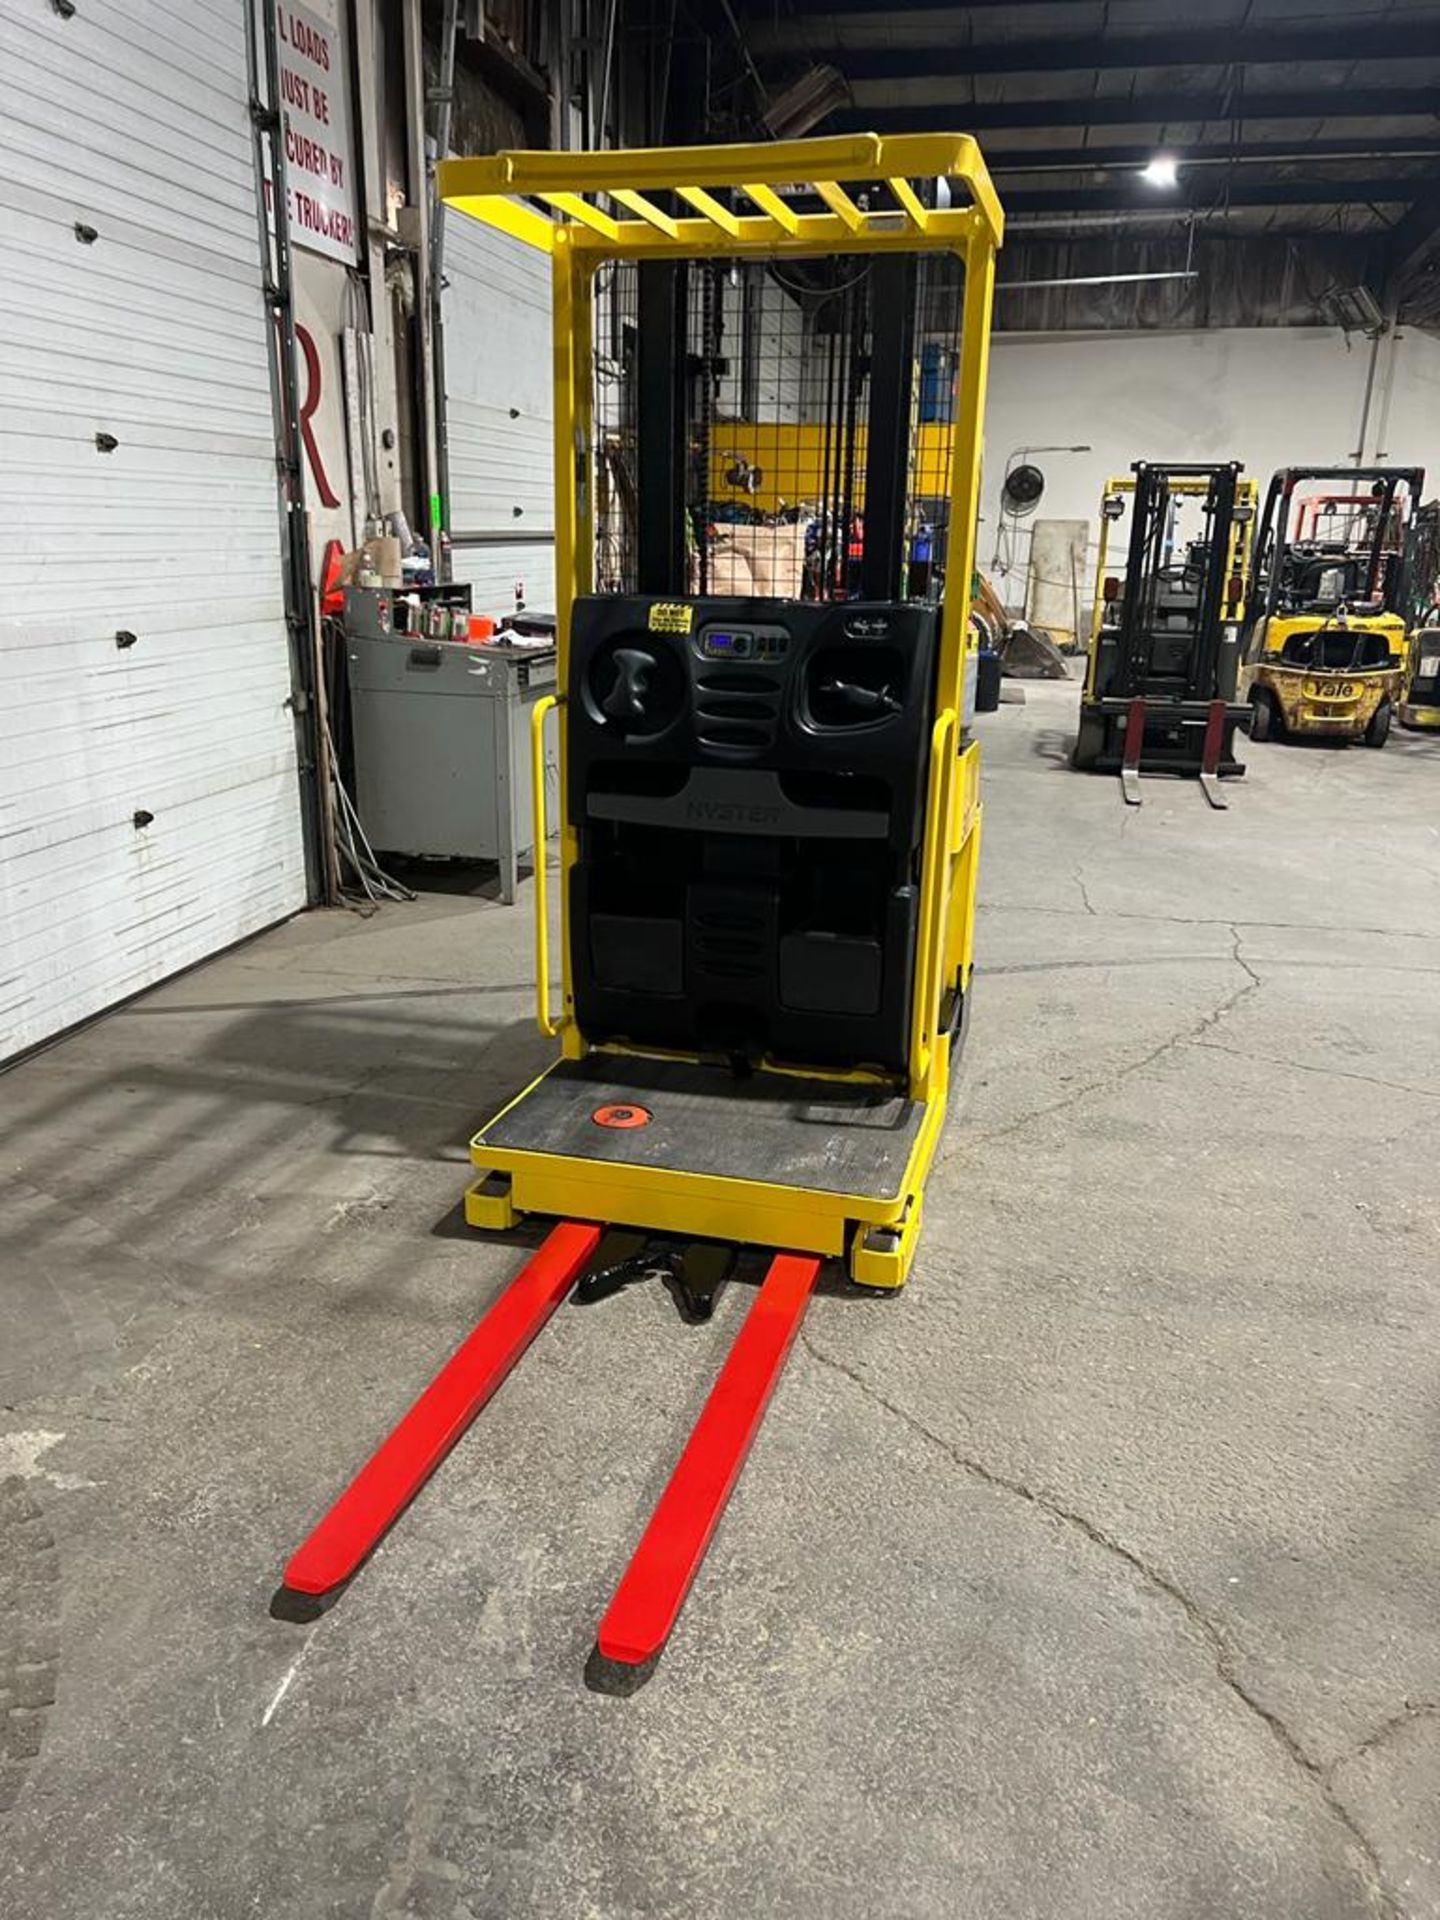 2015 Hyster Order Picker 3000lbs capacity electric Powered Pallet Cart 24V battery - FREE CUSTOMS - Image 2 of 4